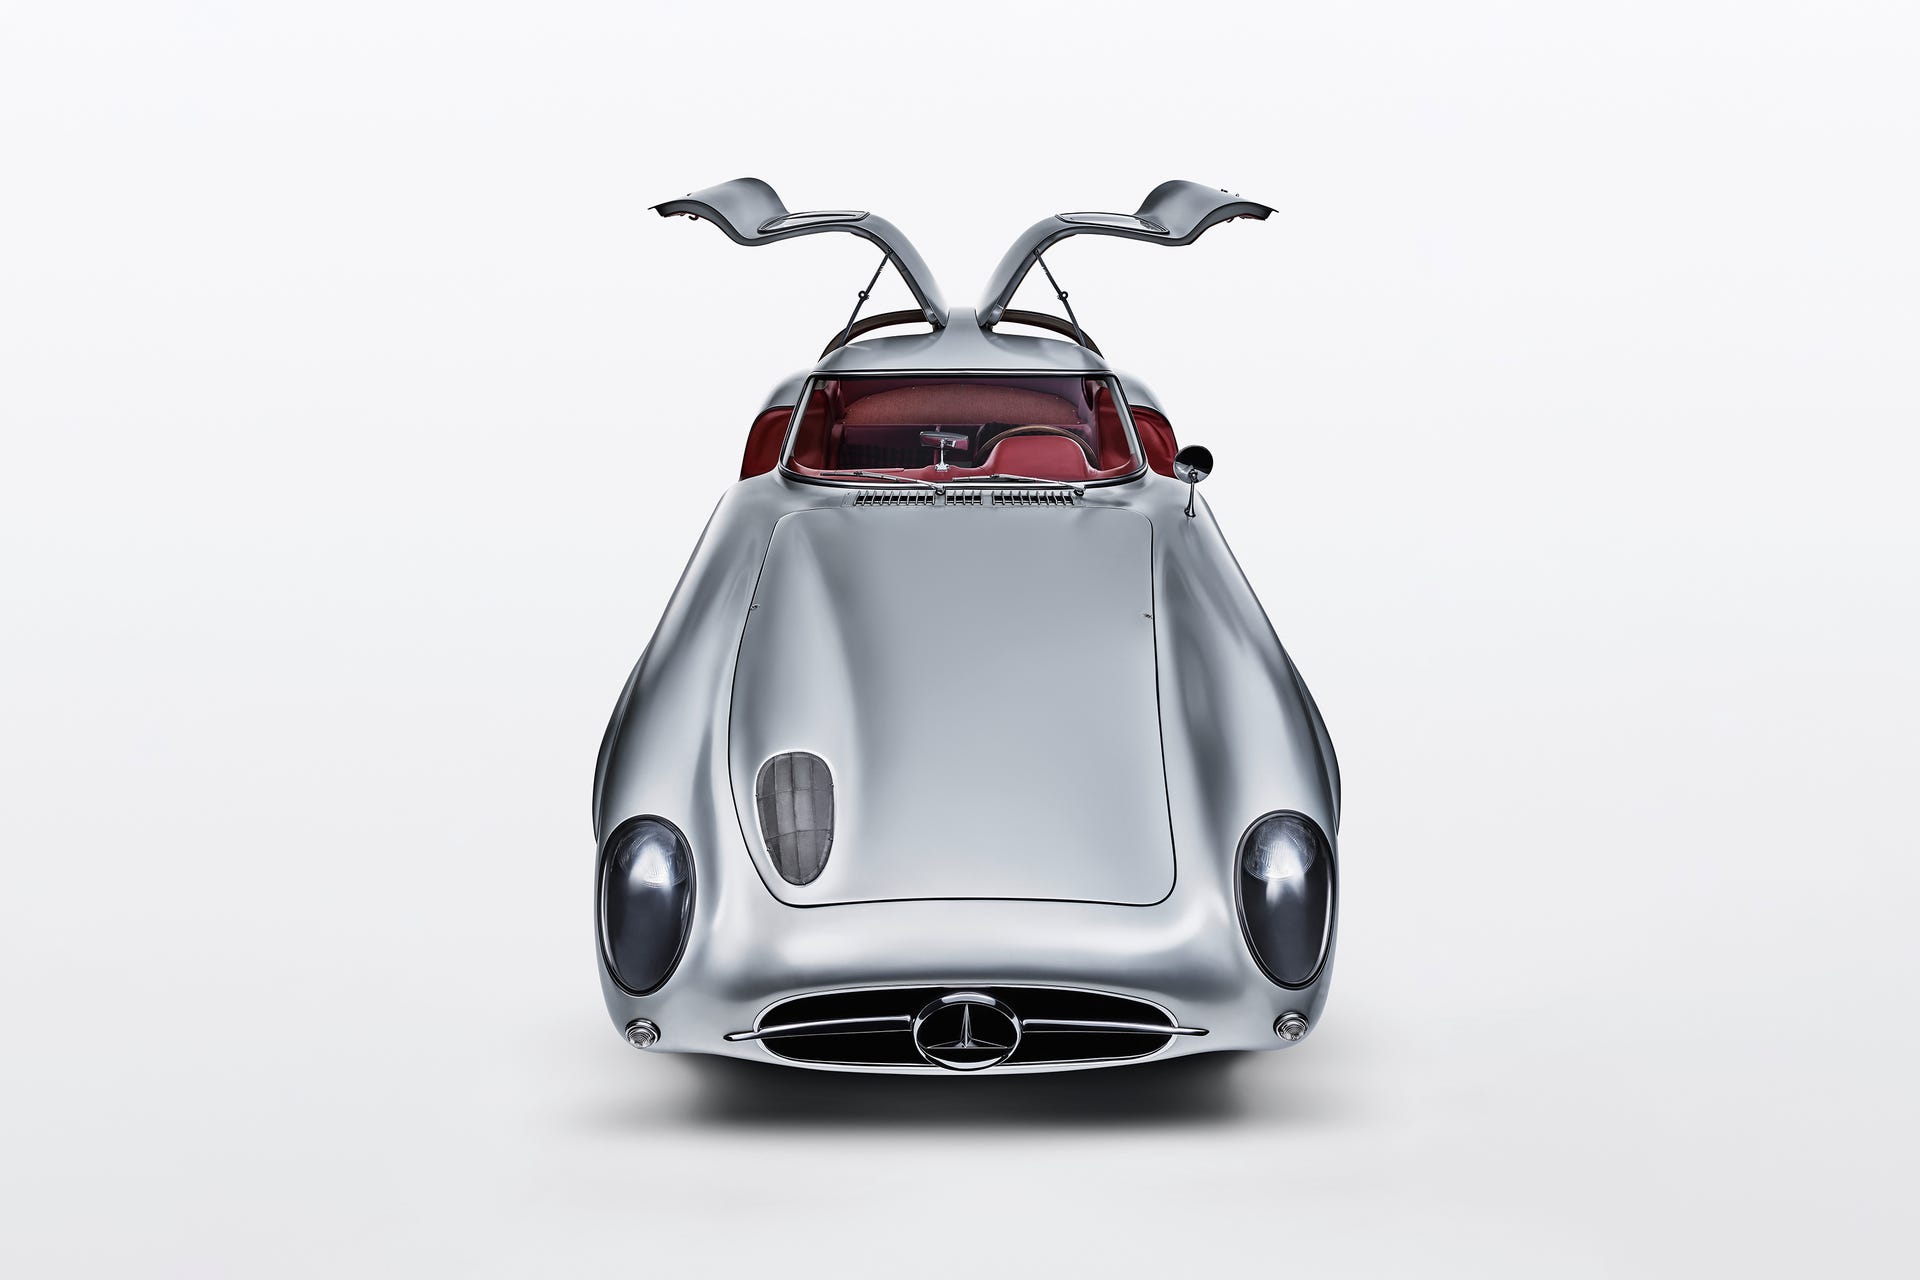 1955 Mercedes-Benz 300 SLR Uhlenhaut Coupe front view with gullwing doors open